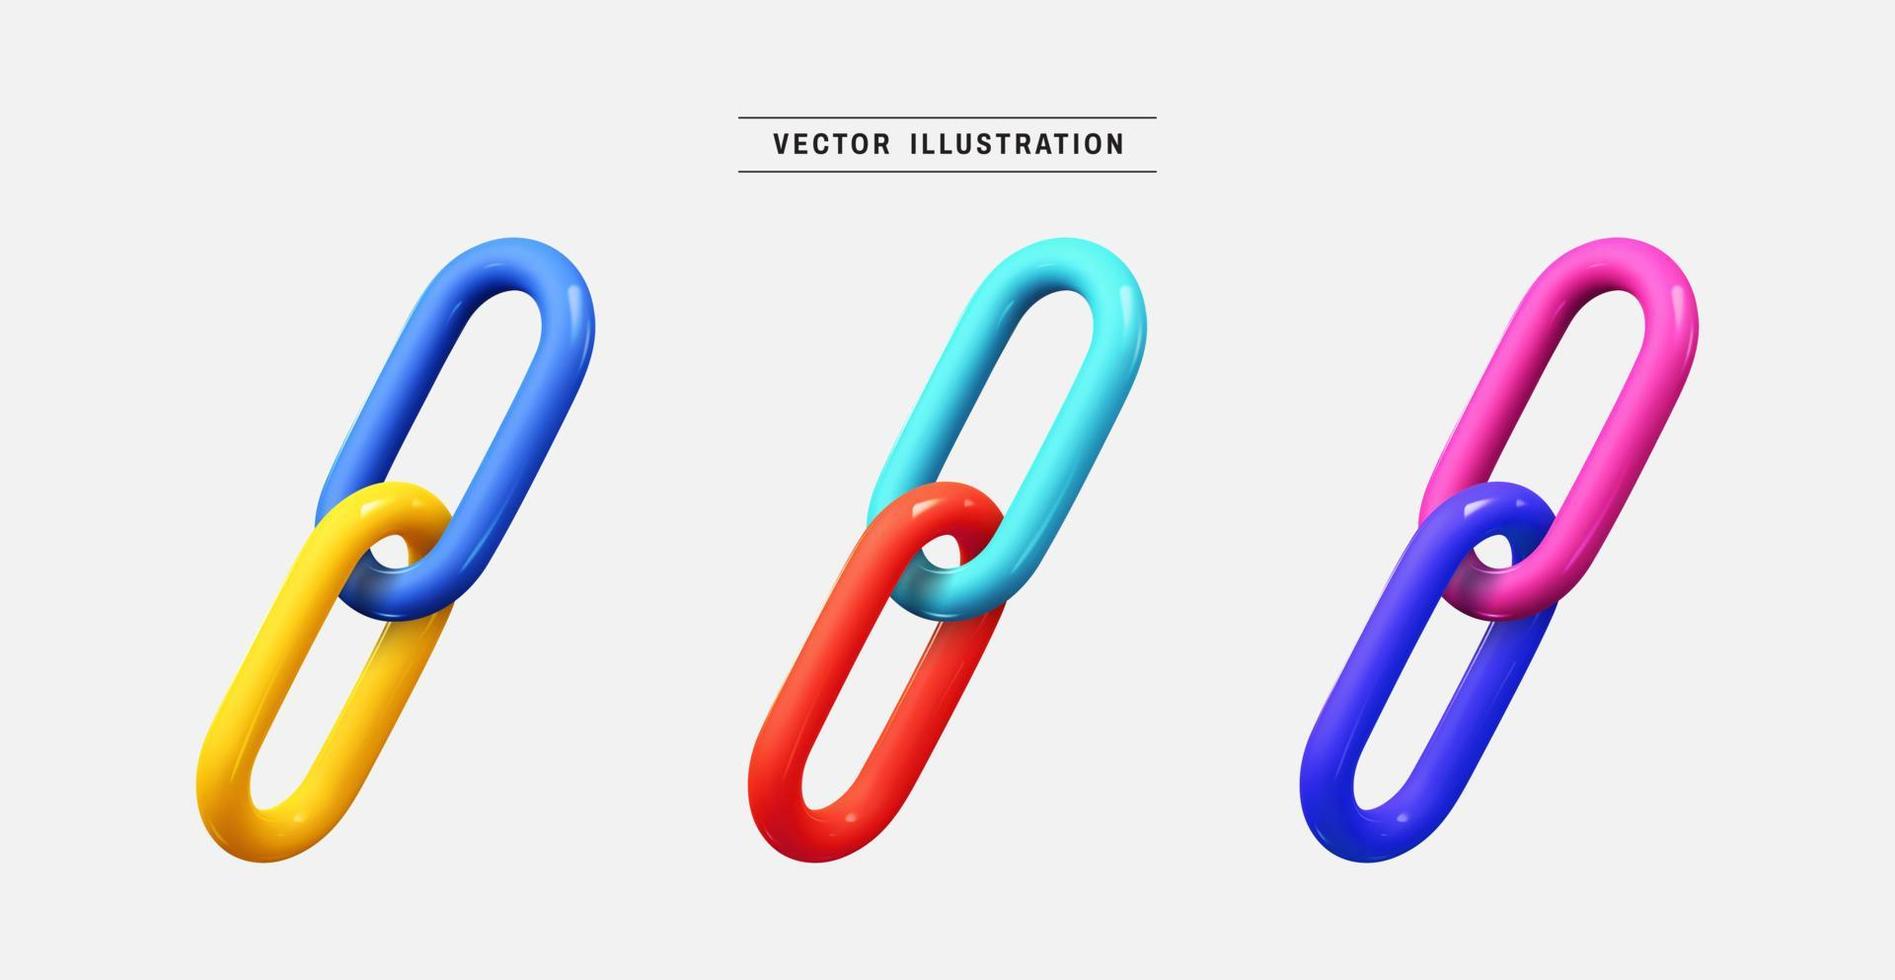 Colorful chain or link 3d icon set. realistic design elements collection. vector illustration in cartoon minimal style